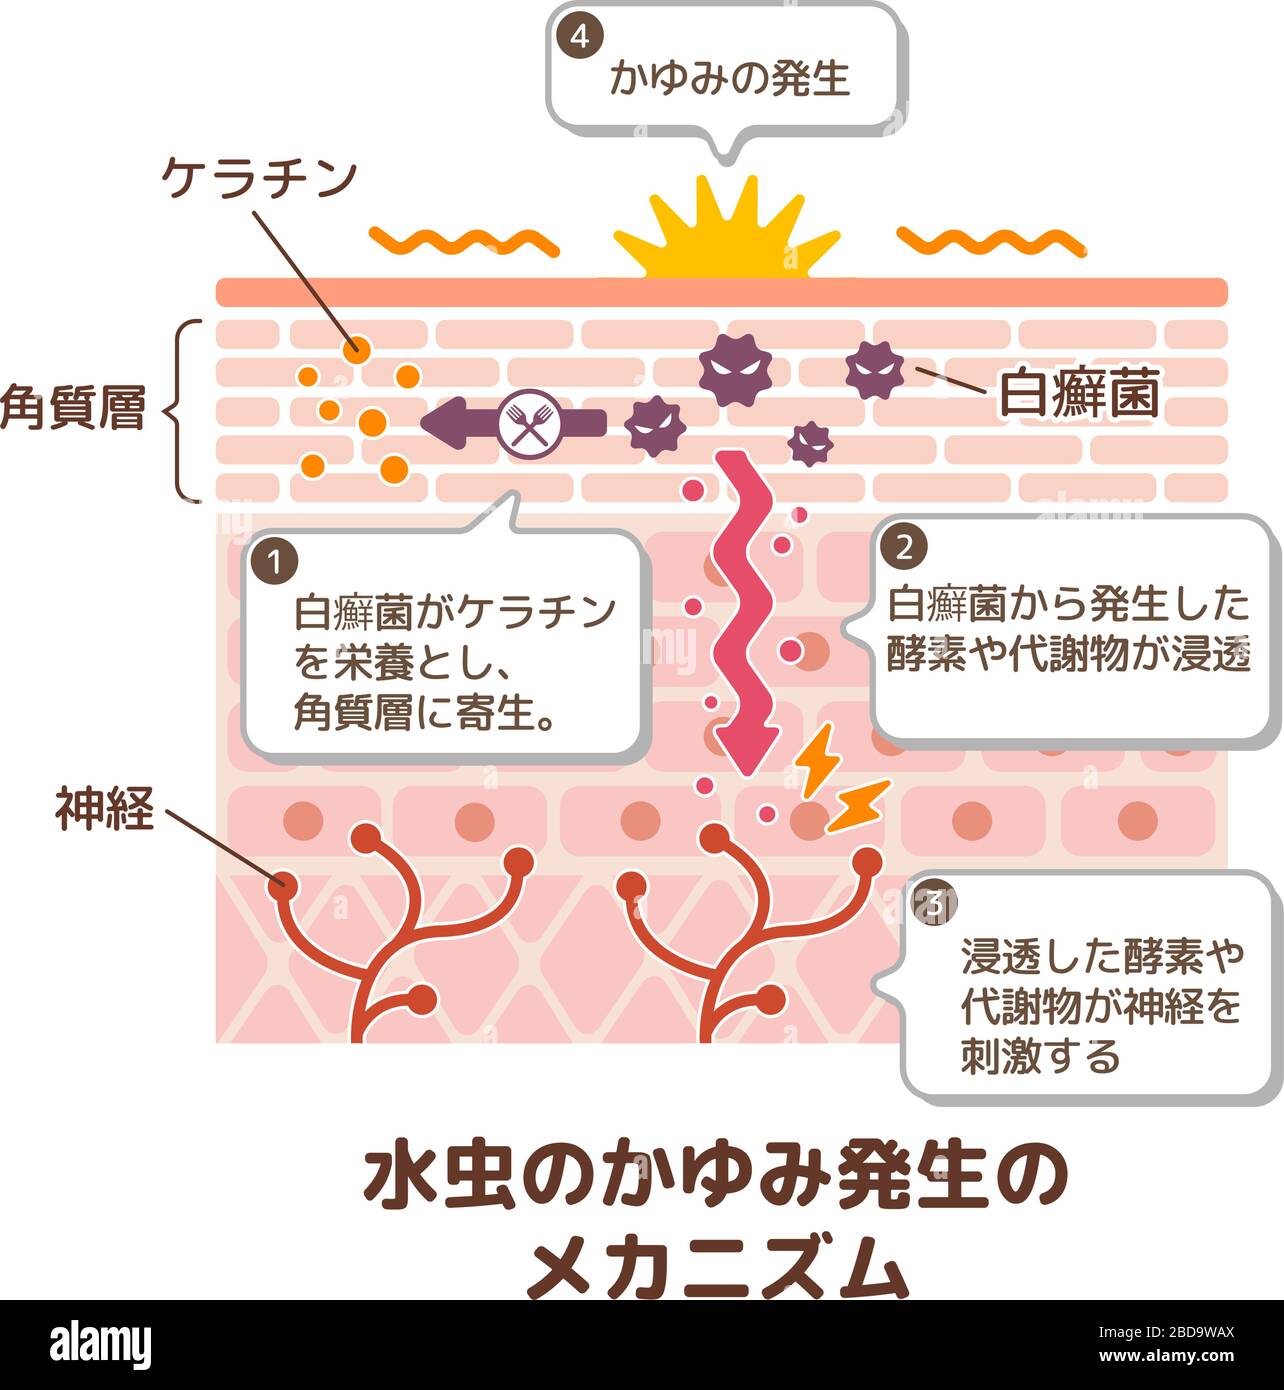 Generation mechanisim of athlete's foot ( ringworm) vector illustration / with Japanese explanation texts. Stock Vector